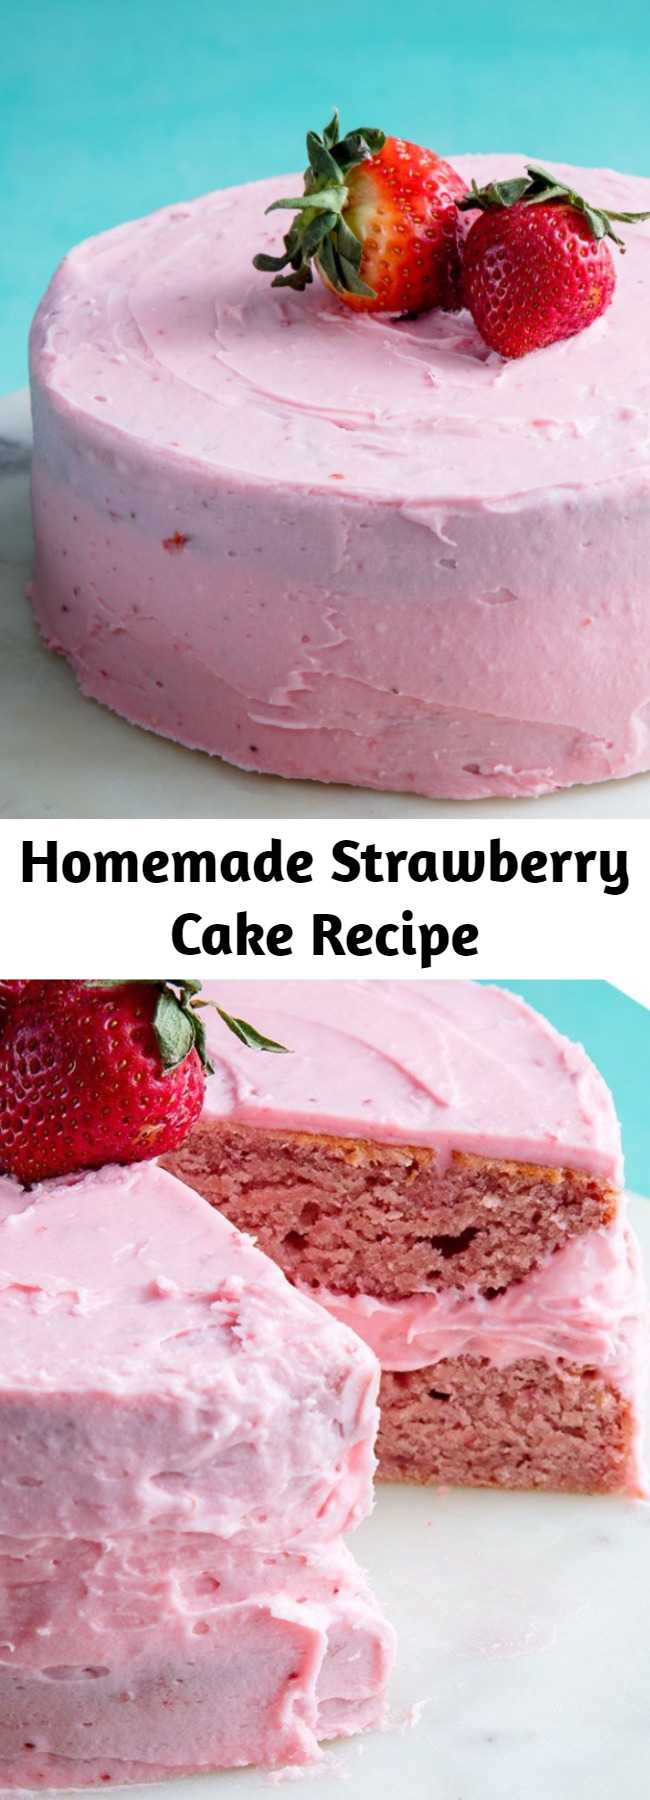 Homemade Strawberry Cake Recipe - Strawberry cake is sweet and tart and unmatched to other cakes. The cream cheese frosting is what really makes this cake. Making strawberry compote is easier than you'd think. All you're doing is cooking down the fresh berries with sugar and lemon juice. We used it in the batter and frosting to make sure that the cake has the best strawberry flavor possible. The compote will make a little more than you need, but you can use leftover just as you would jam!